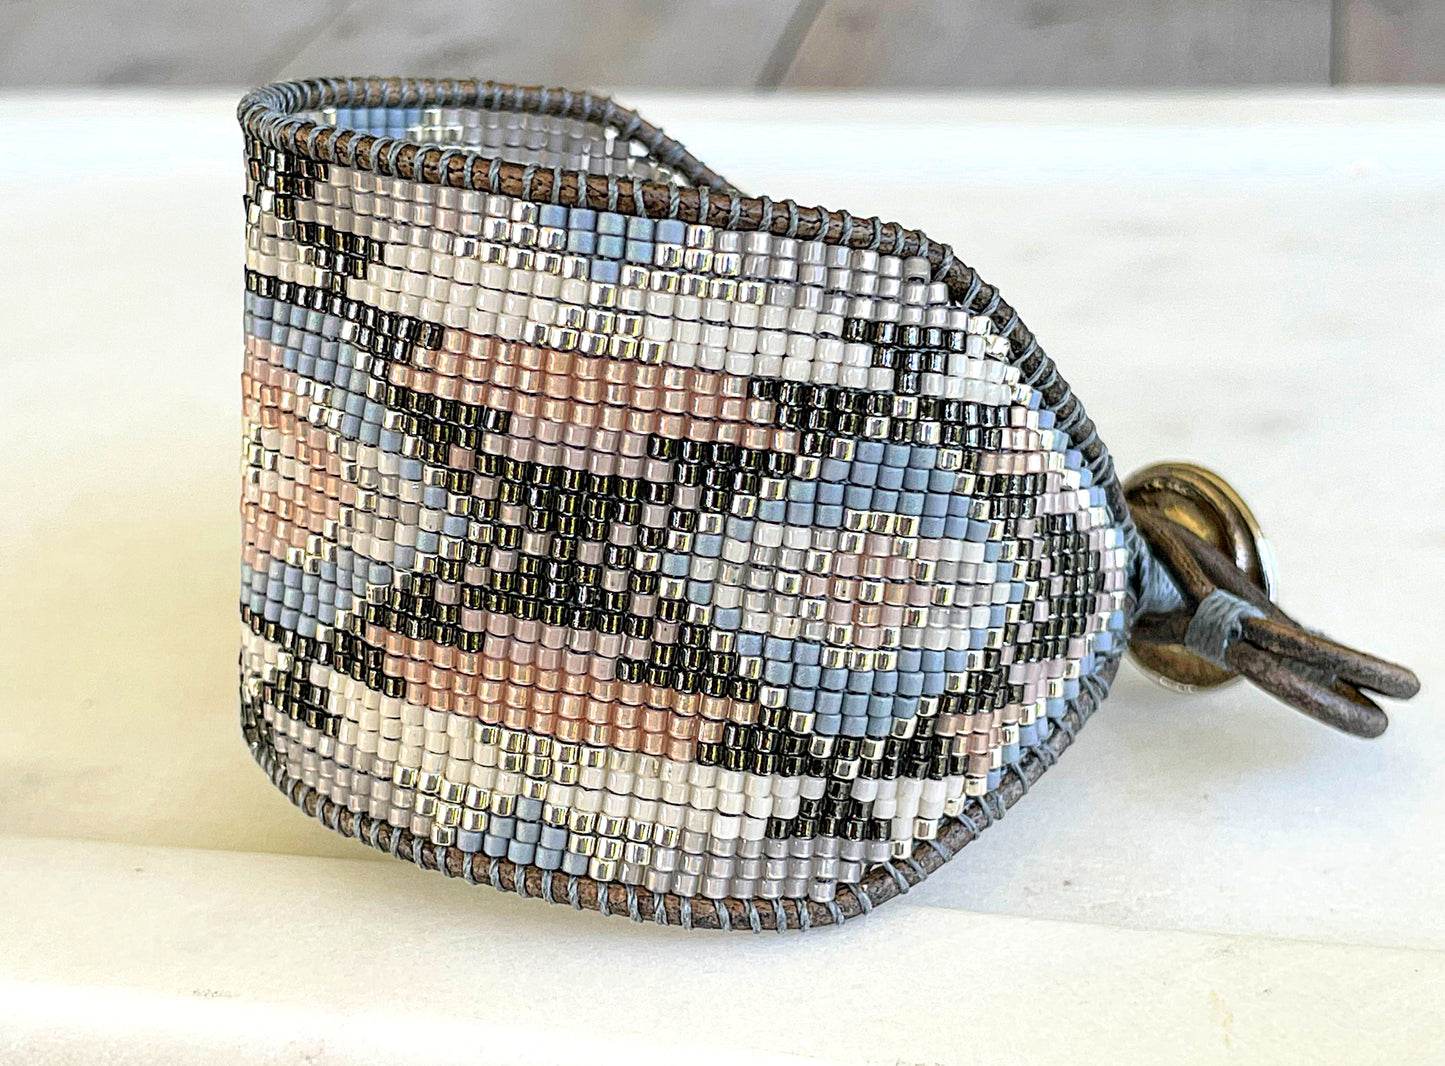 Neutral Gray, Tan, and Silver Bead Loom Woven Wide Cuff Bracelet